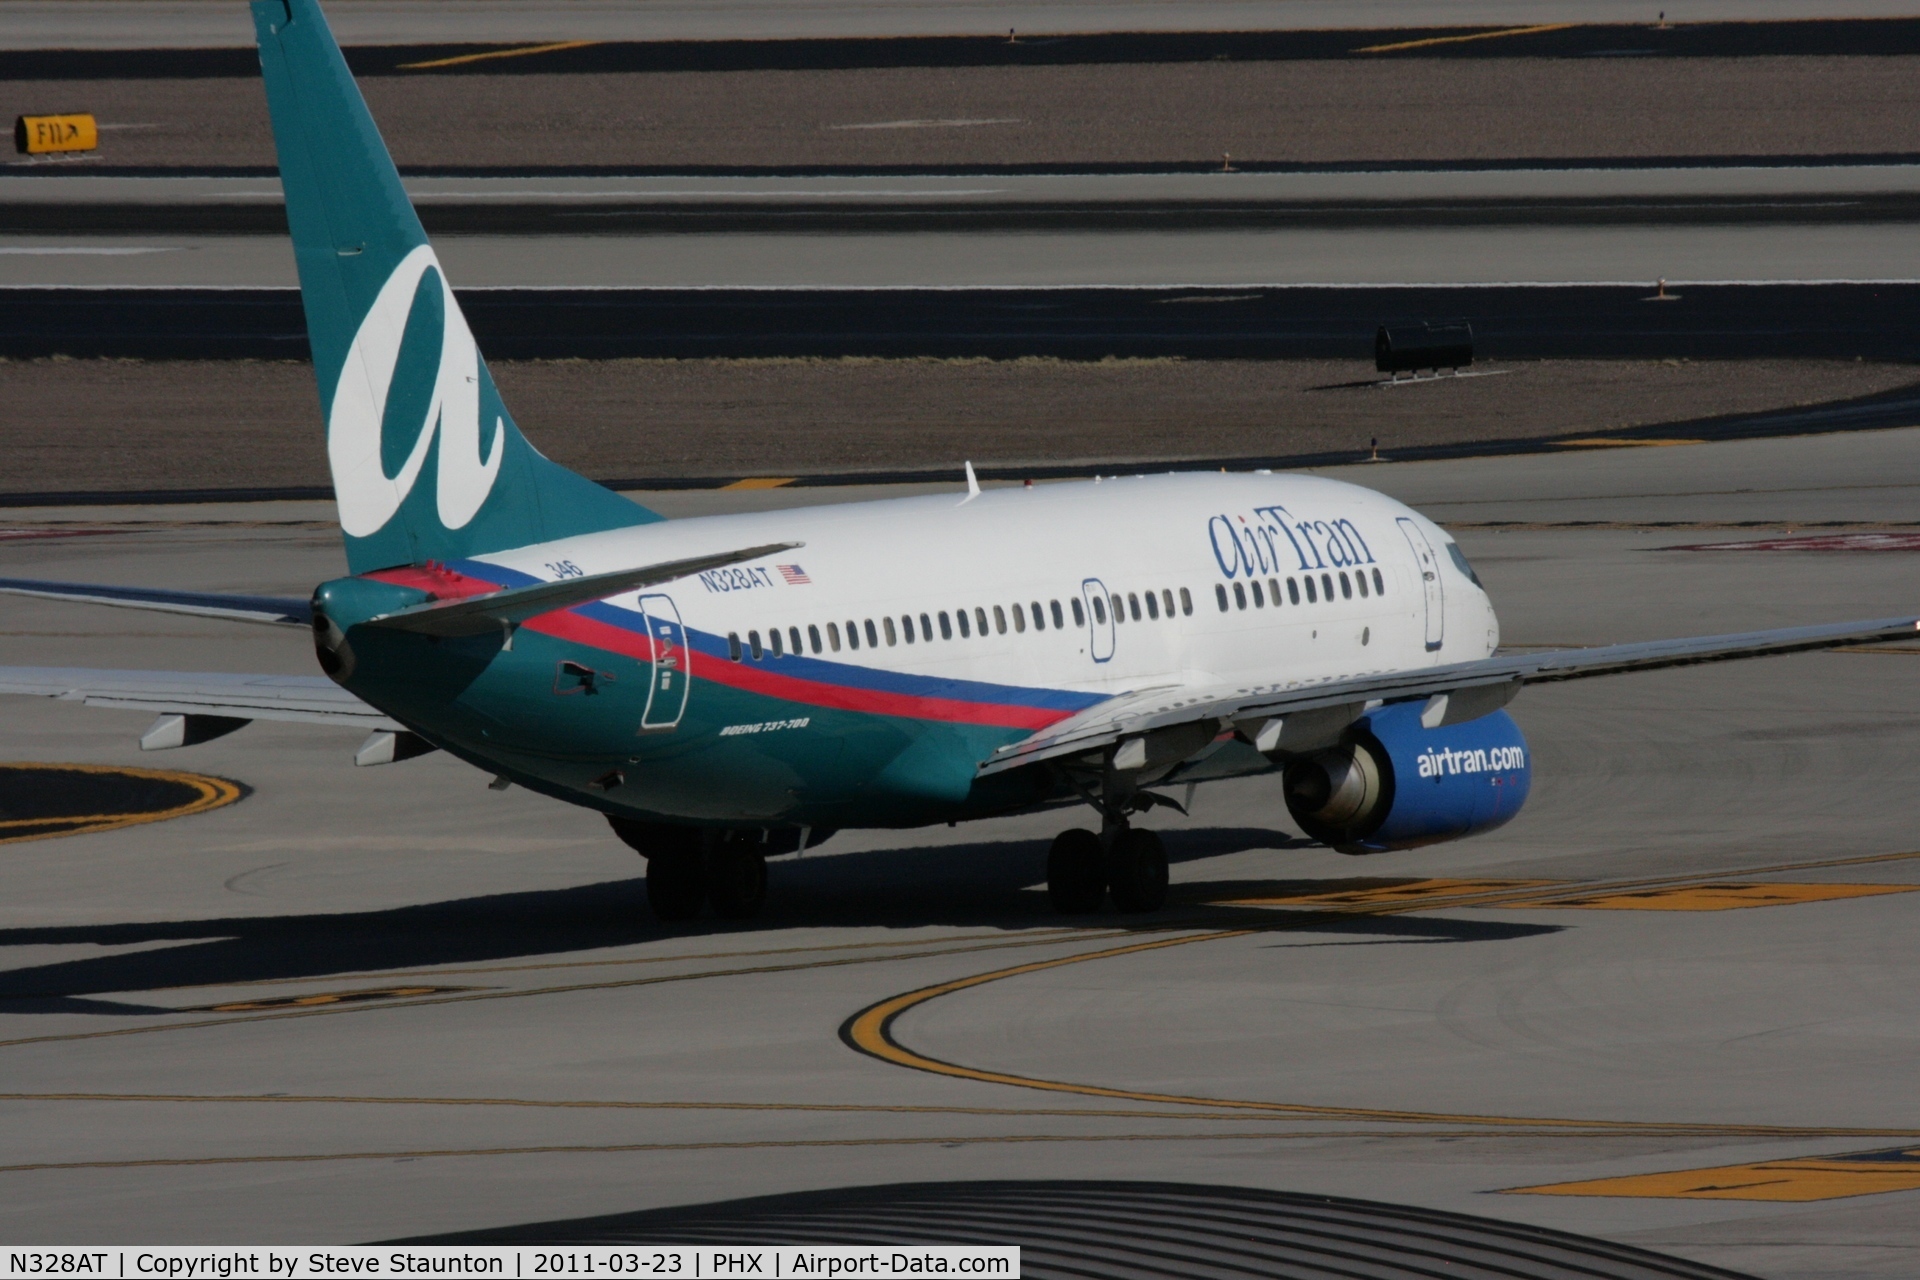 N328AT, 2007 Boeing 737-7BD C/N 33934, Taken at Phoenix Sky Harbor Airport, in March 2011 whilst on an Aeroprint Aviation tour